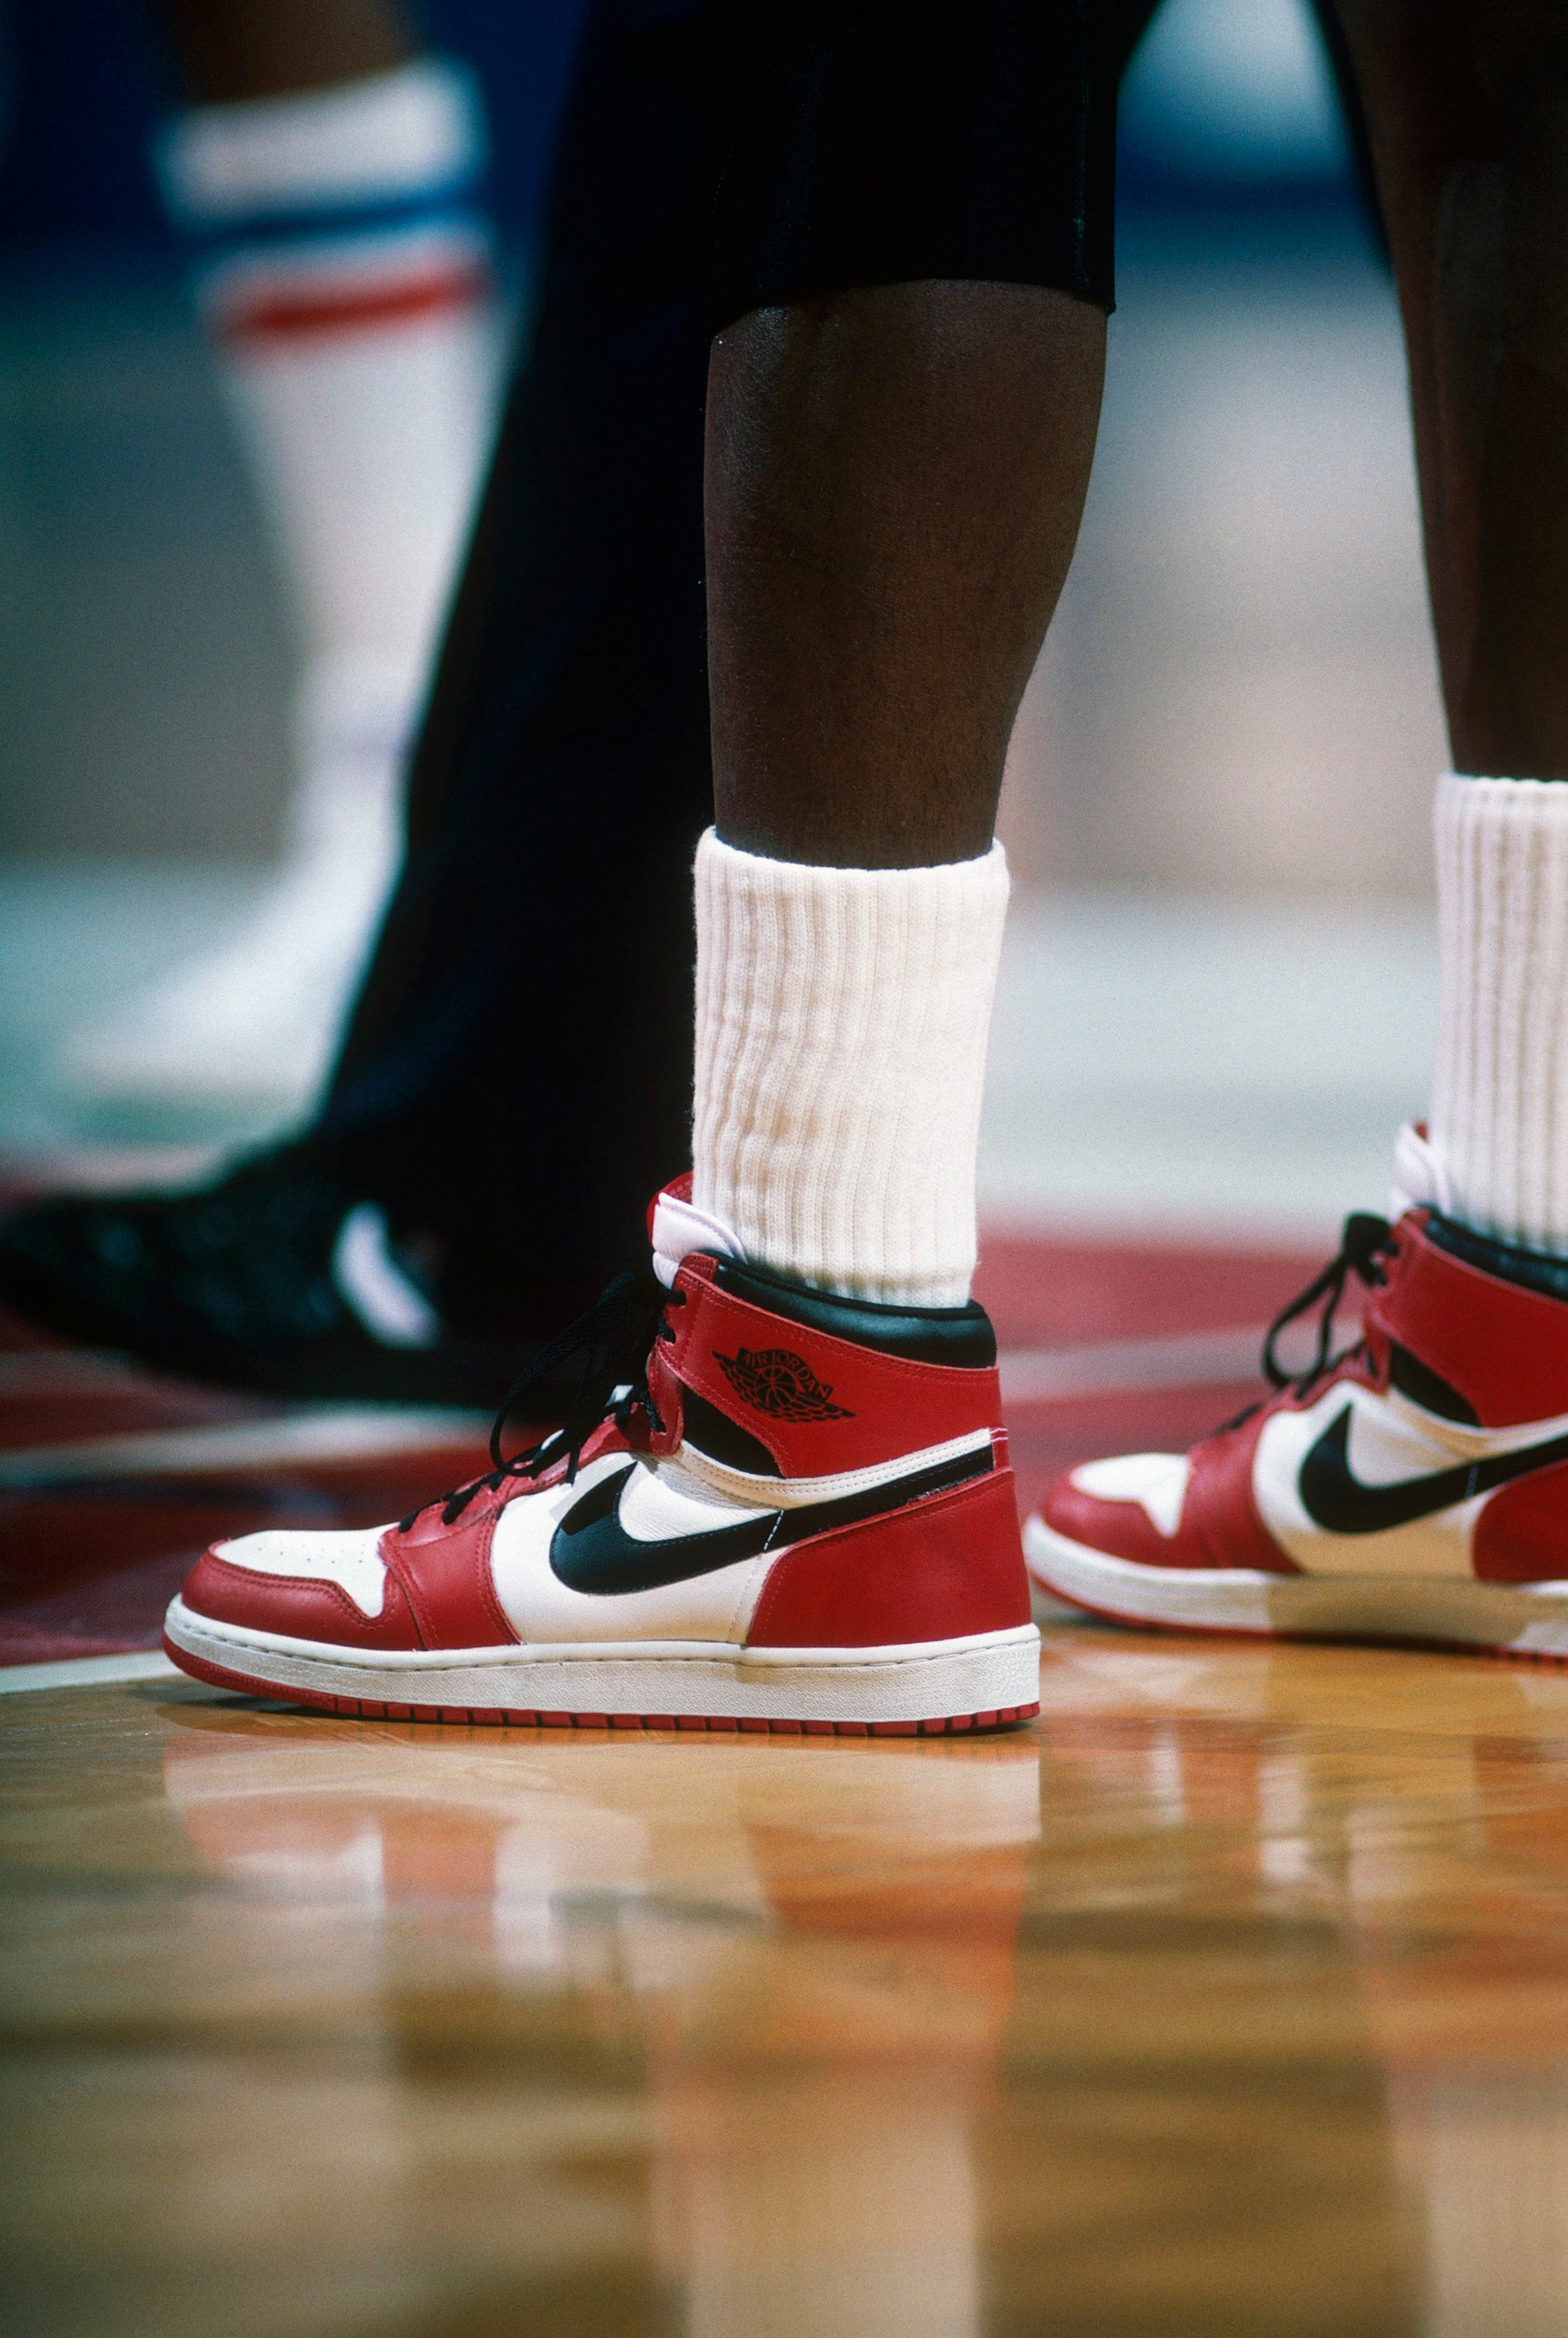 Michael Jordan wears his signature sneakers, the Jordan 1 during a game against the Washington Bullets in 1985